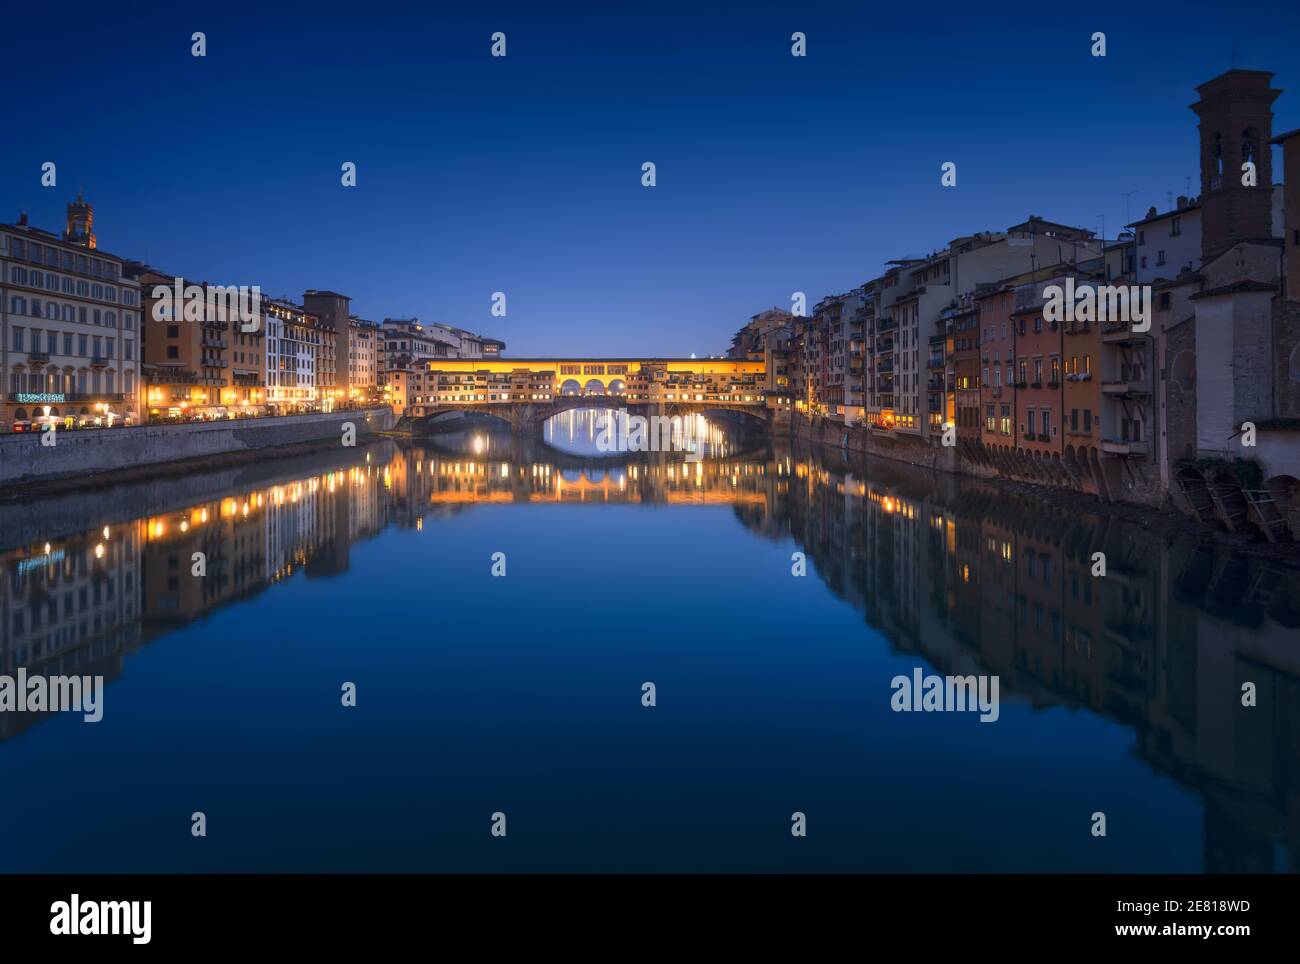 Ponte Vecchio bridge and Arno river in Florence at sunset. Blue hour. Tuscany, Italy, Europe. Stock Photo